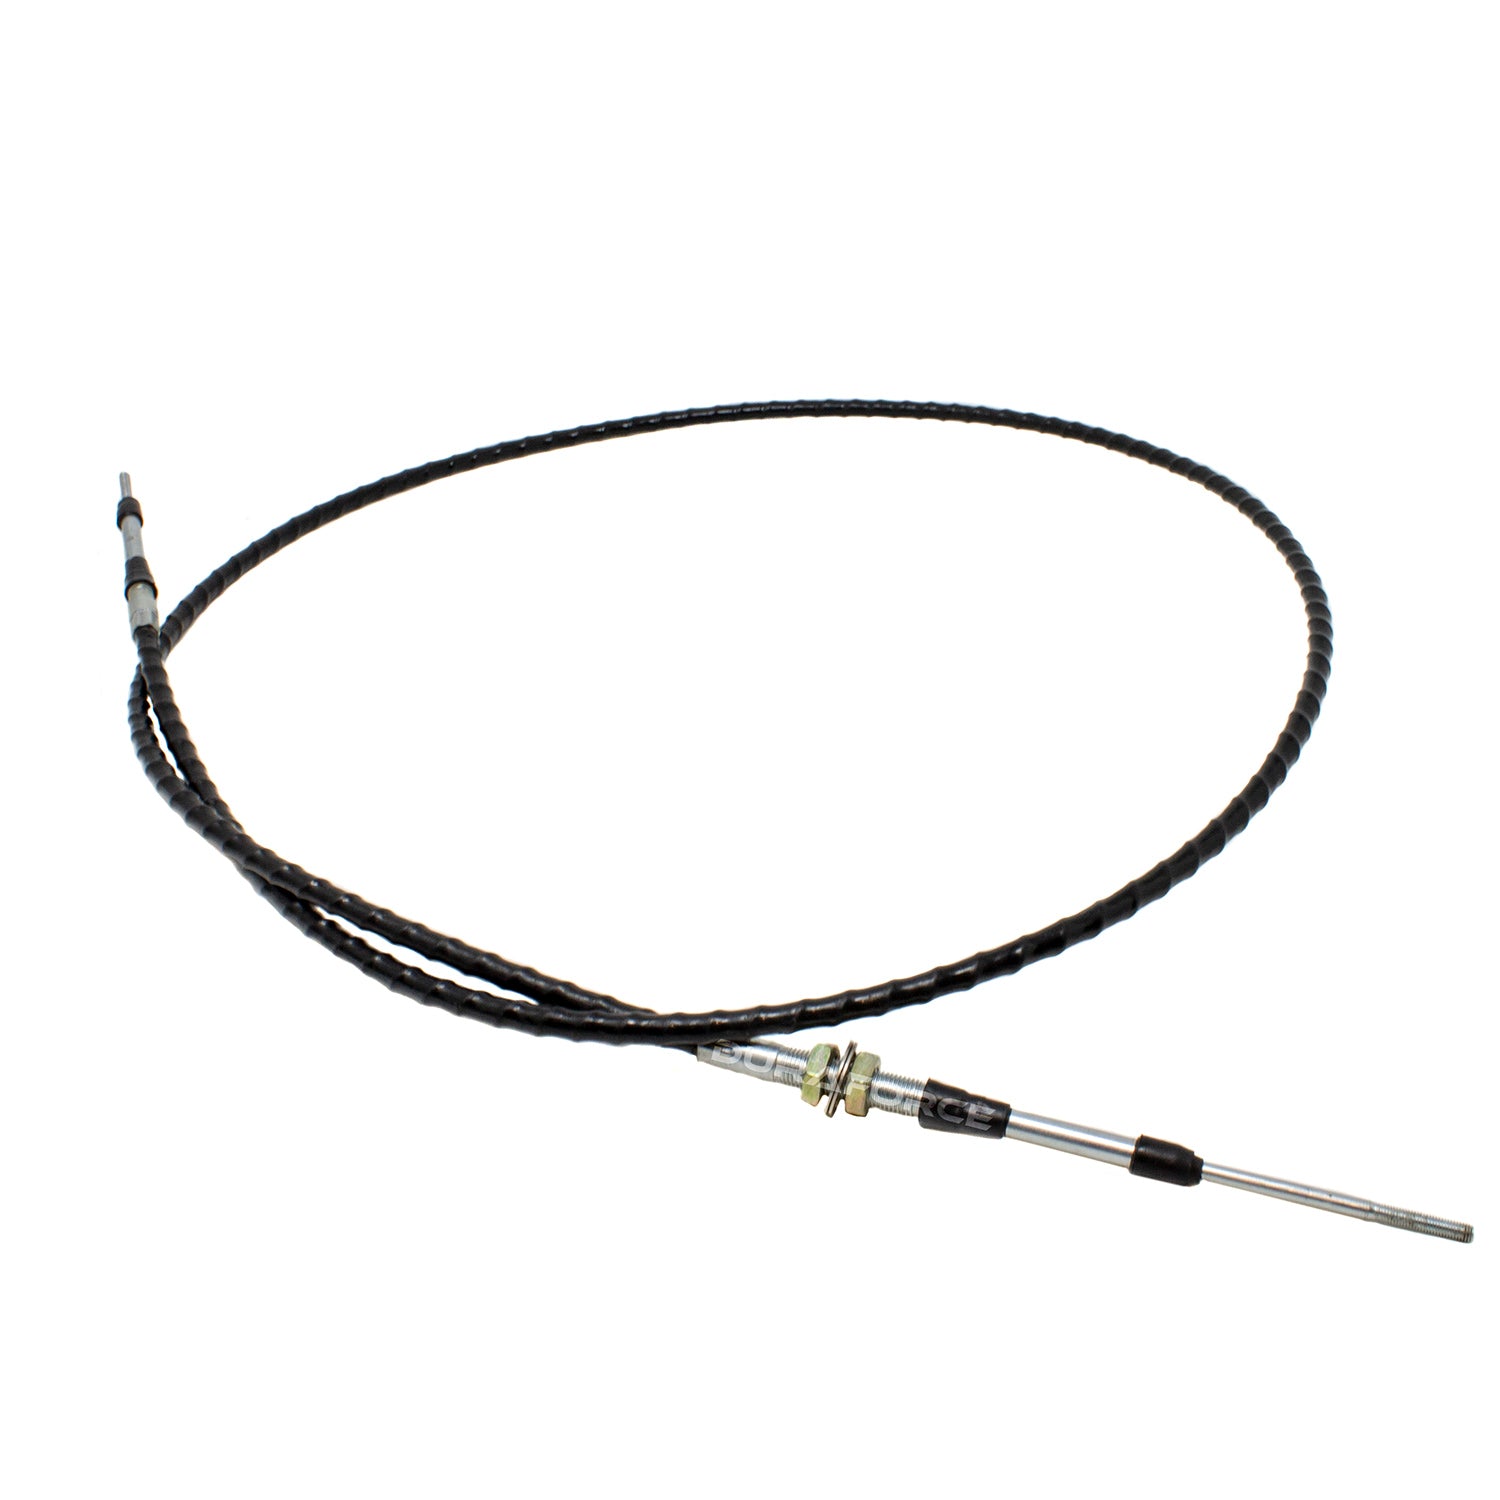 Duraforce 6692662, Throttle Cable For Bobcat